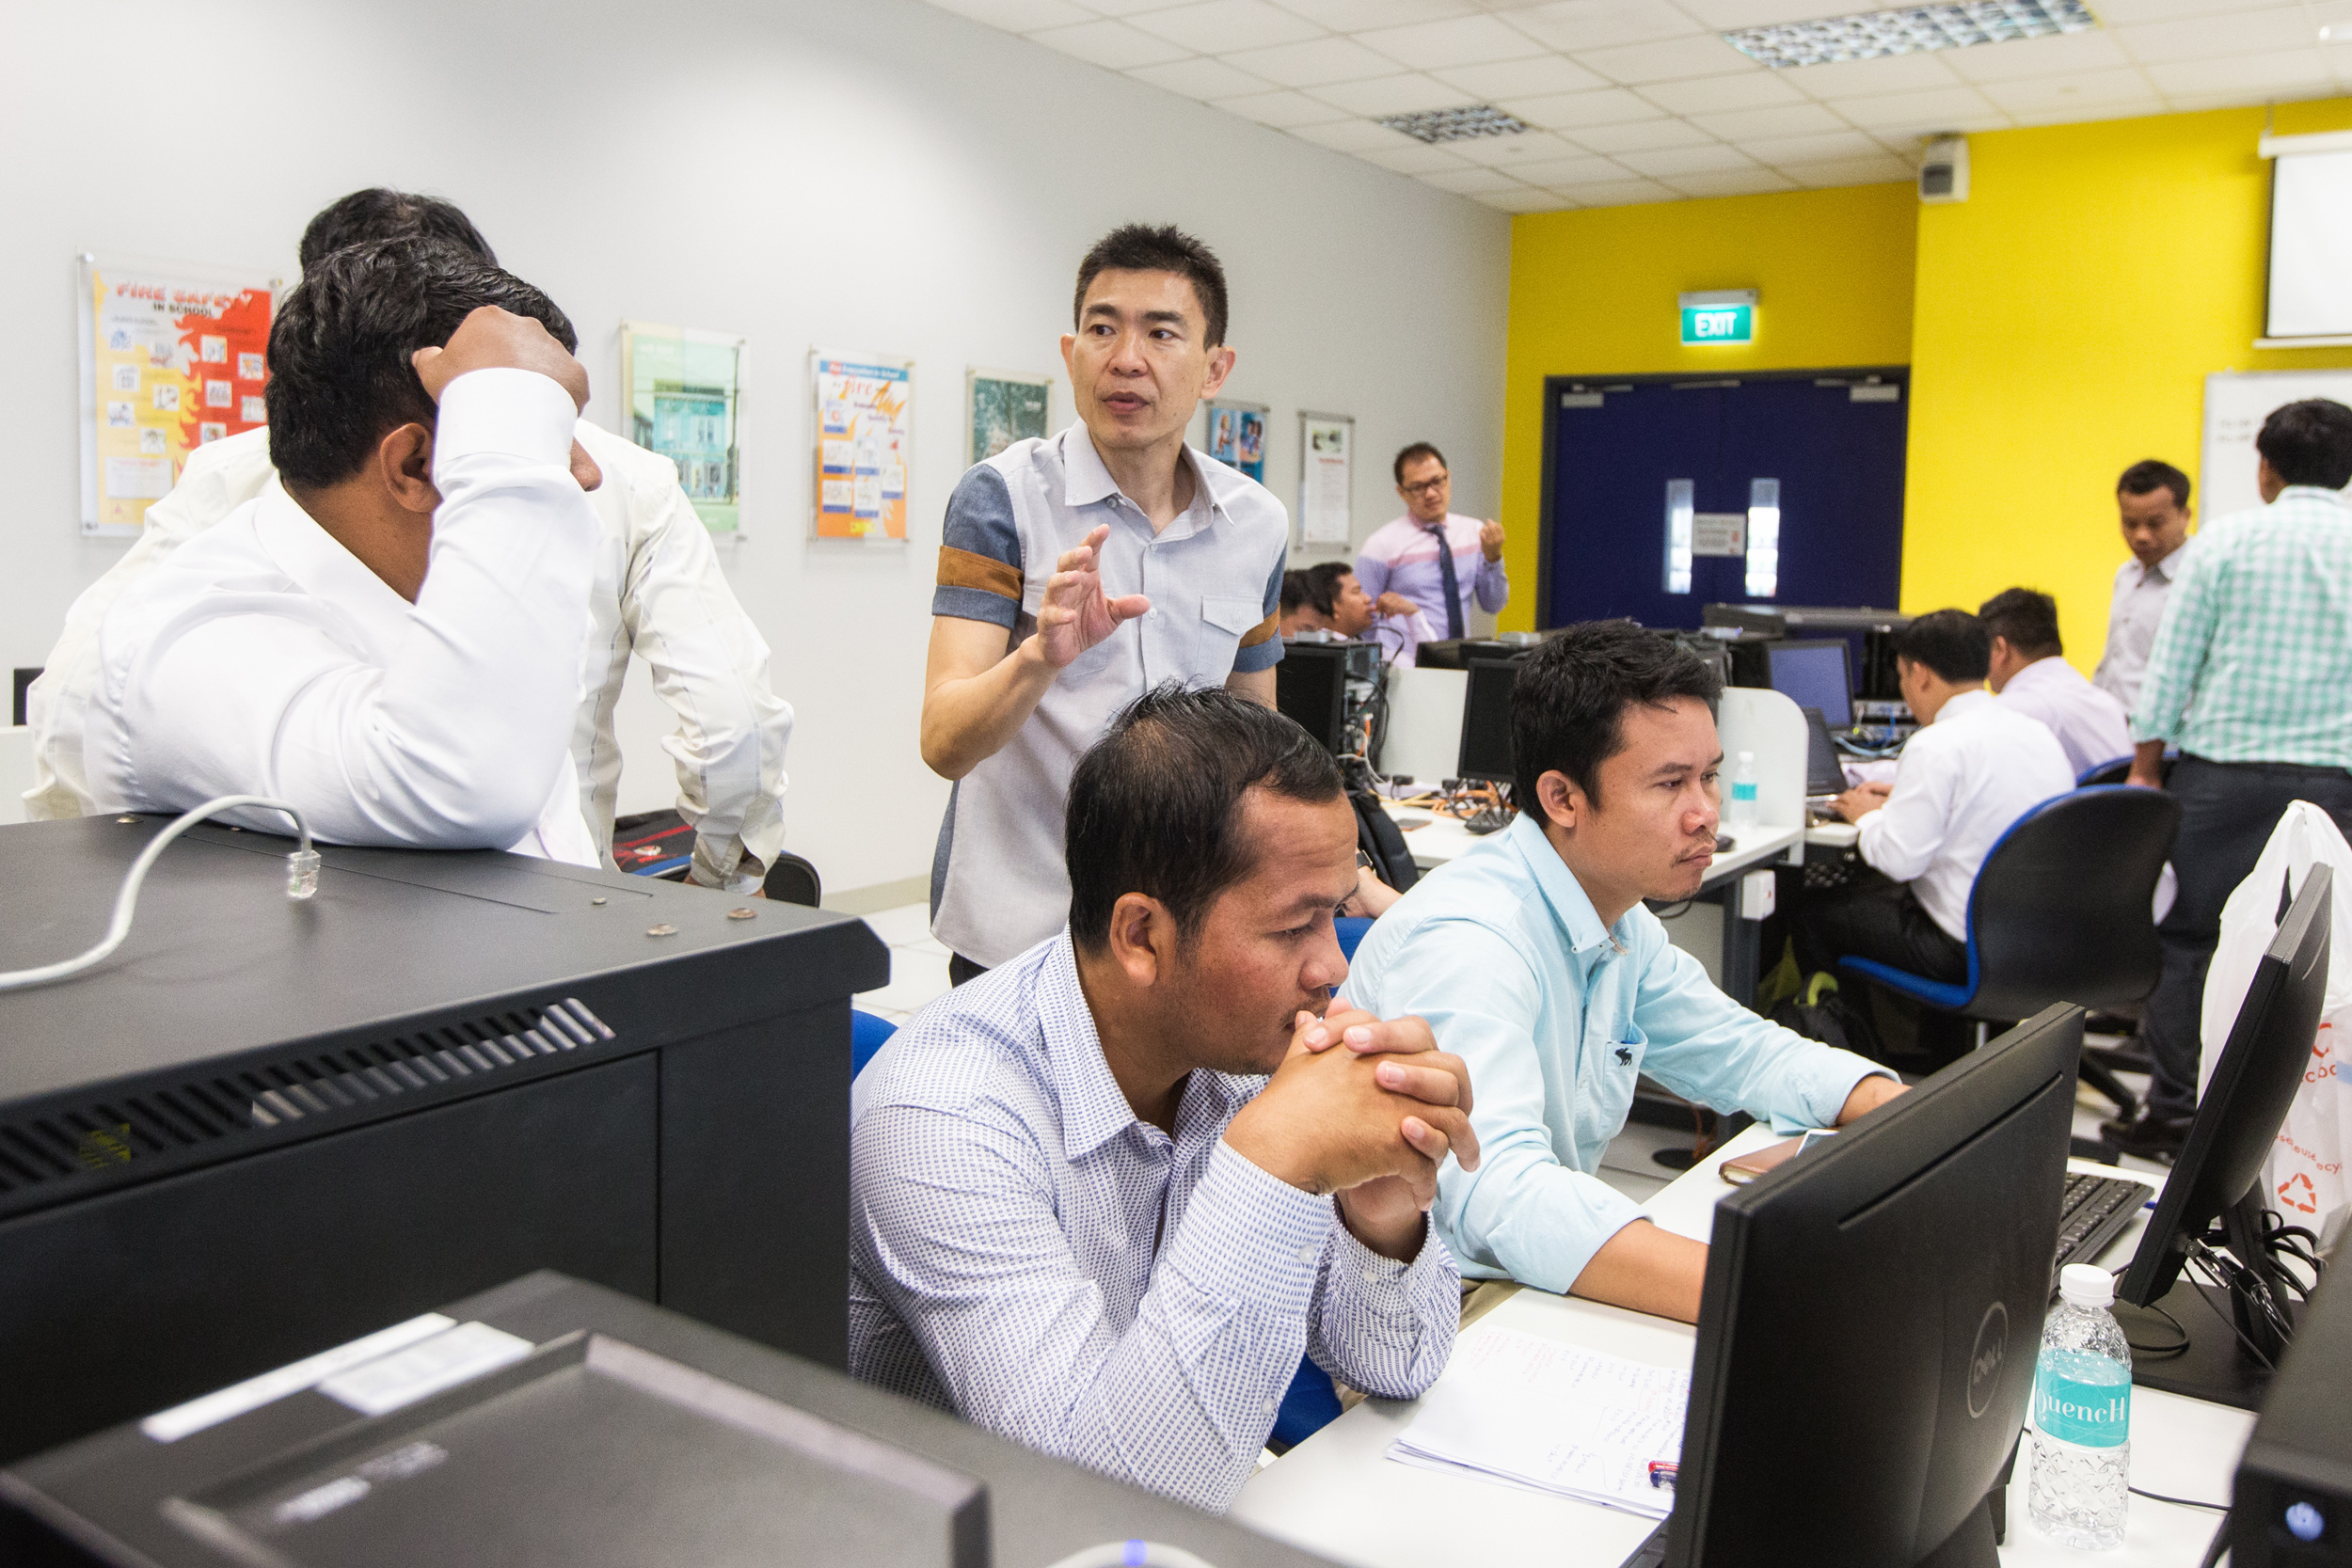  Desmond See (centre), 50, a senior lecturer from Singapore’s Institute of Technical Education (ITE) College East, explaining the steps involved in setting up, configuring and testing a small network. 